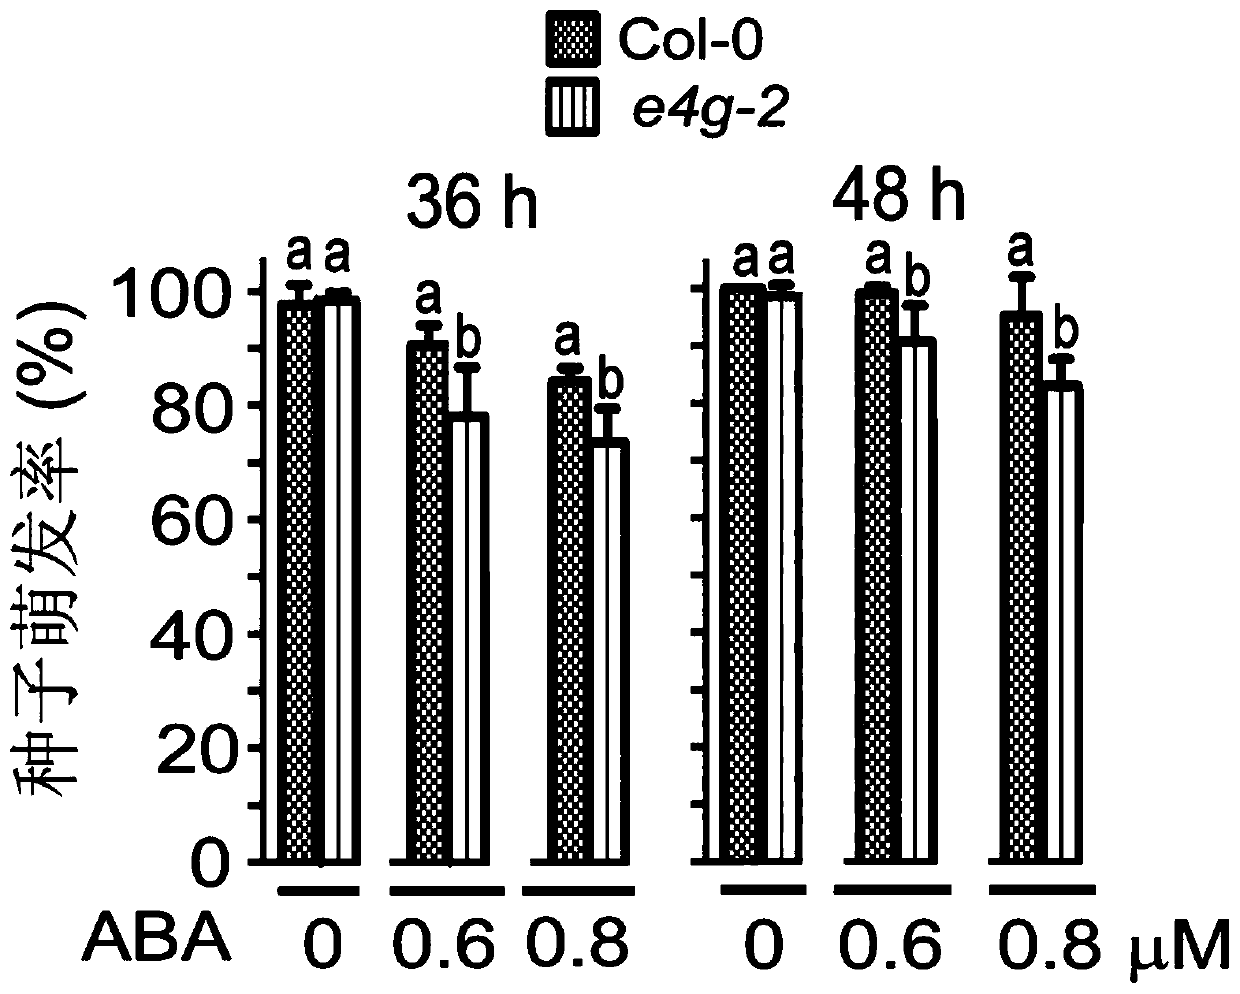 Application of eIF4G protein to regulation and control of tolerance of plants on ABA (abscisic acid)